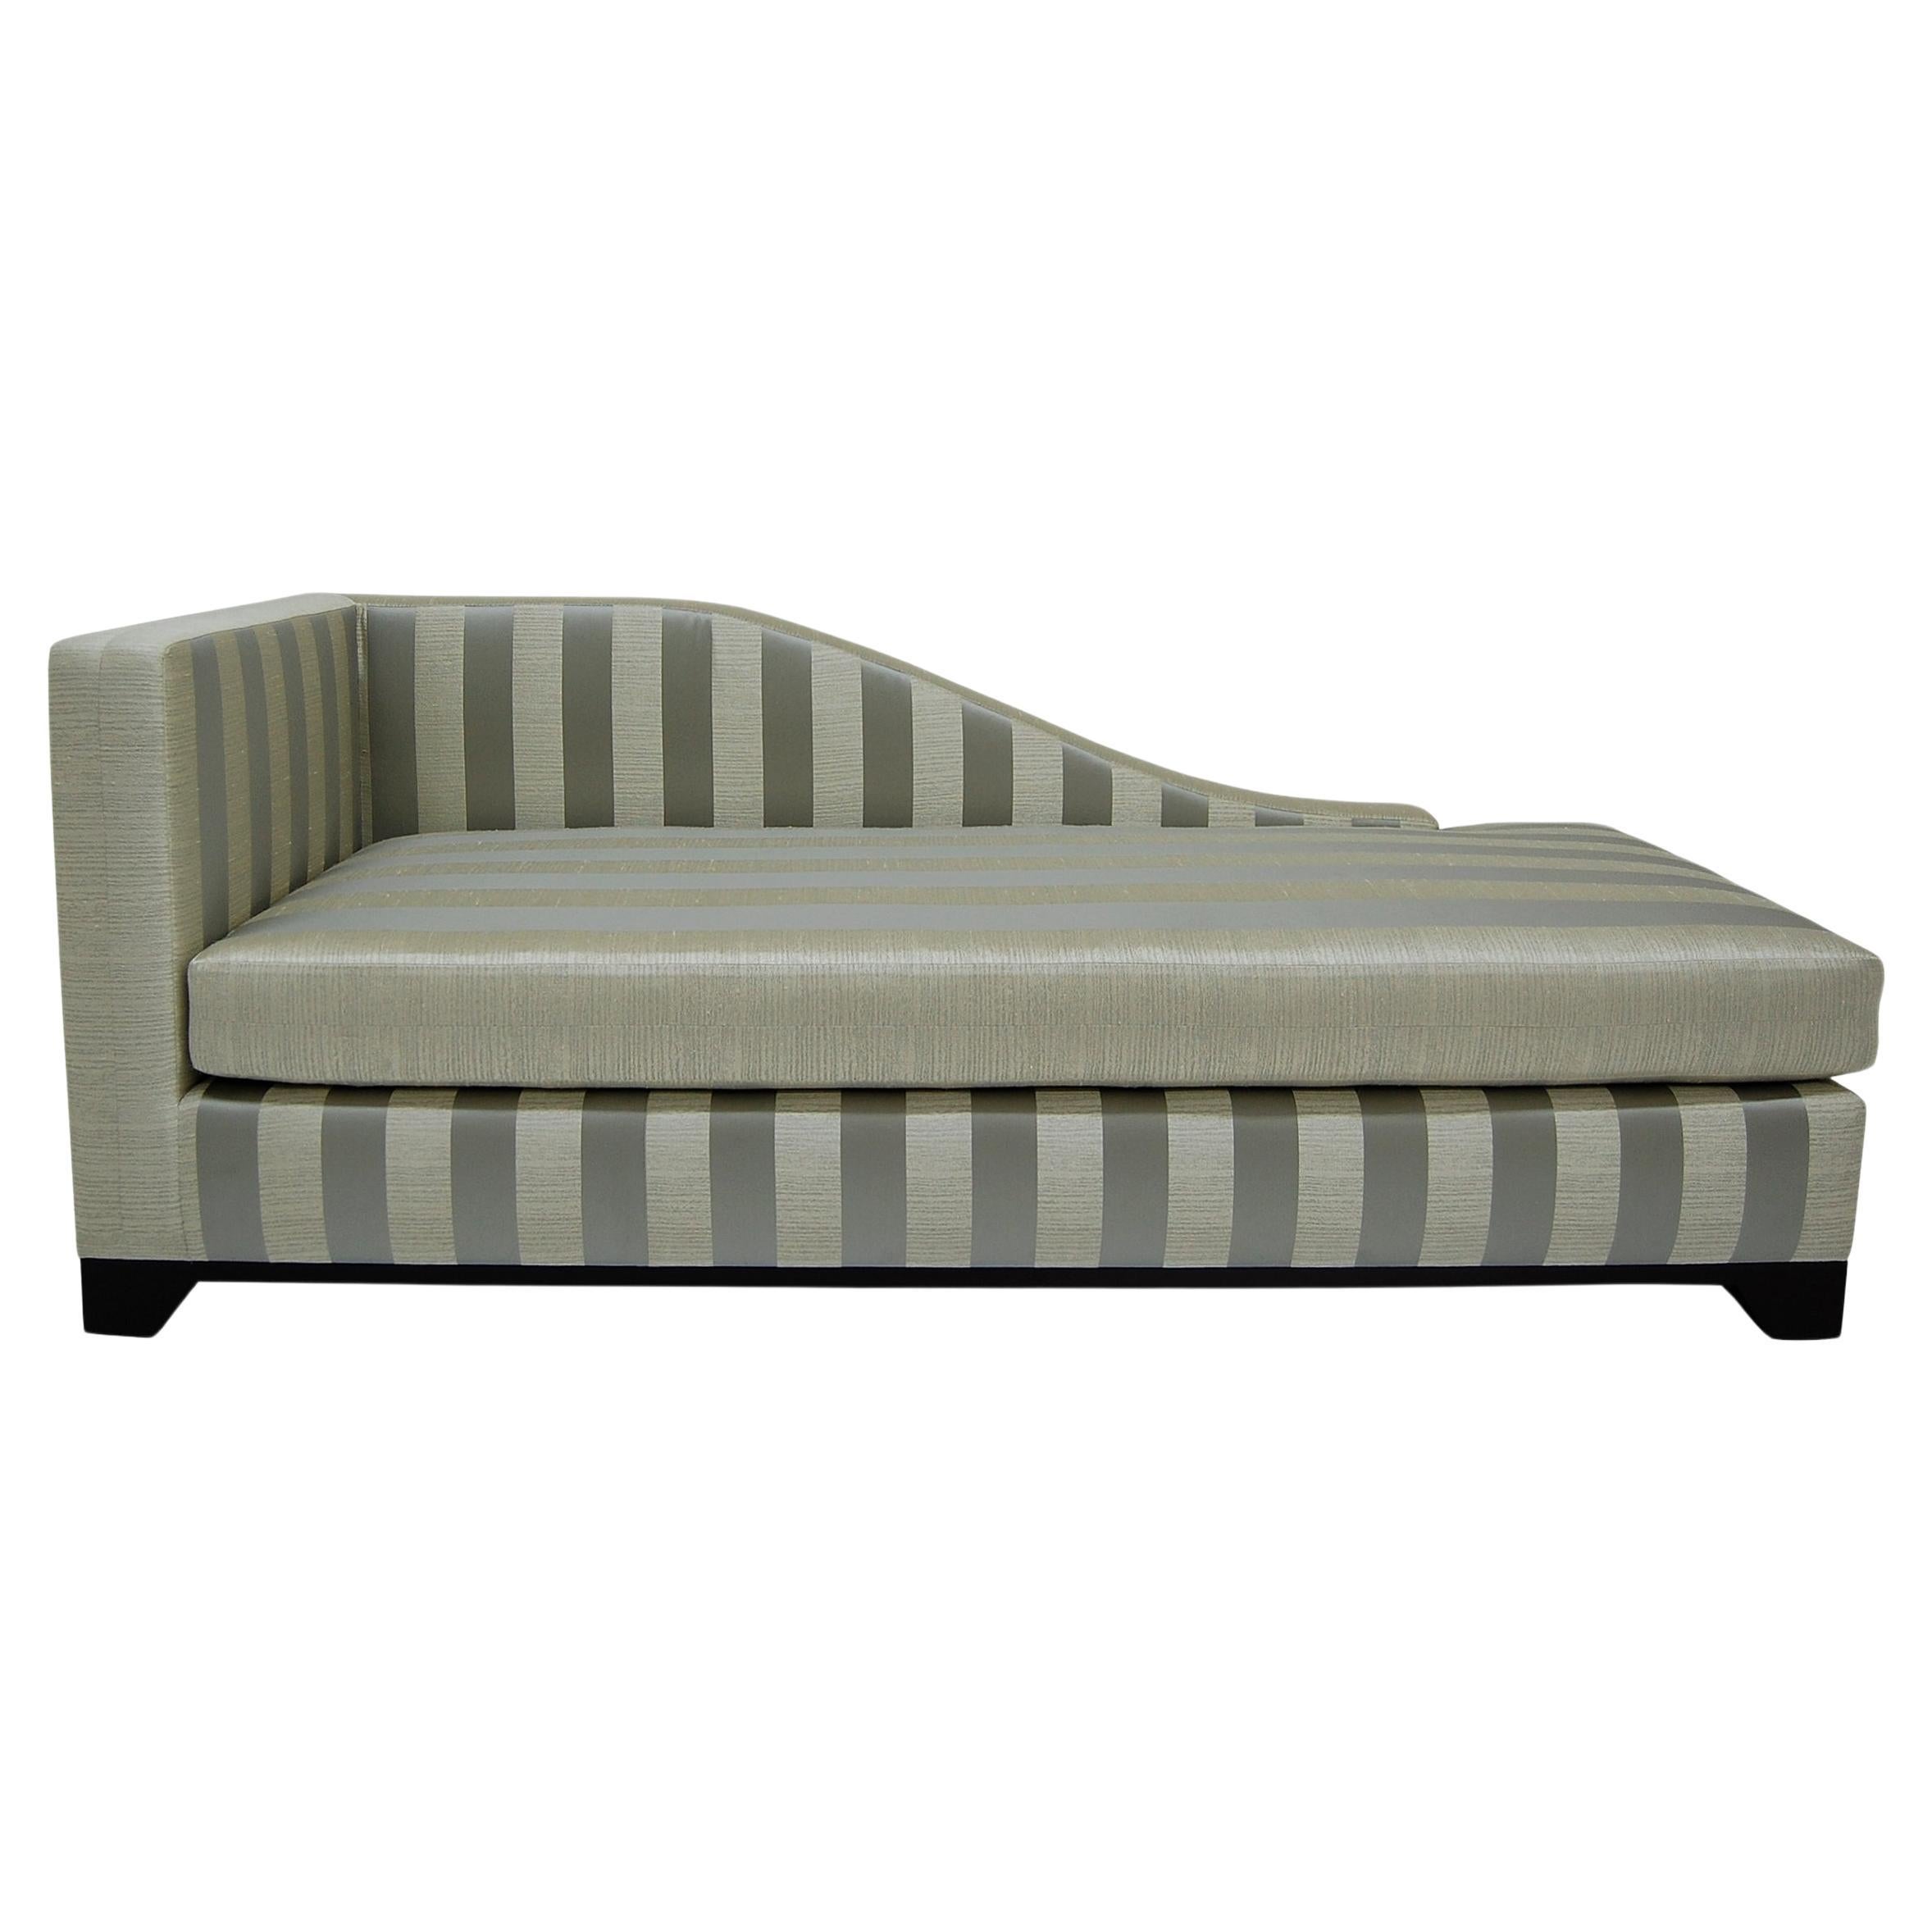 Sprawl Chaise Lounge -Upholstery, Wood Base, Loose Cushion, Tight & Rounded Back For Sale